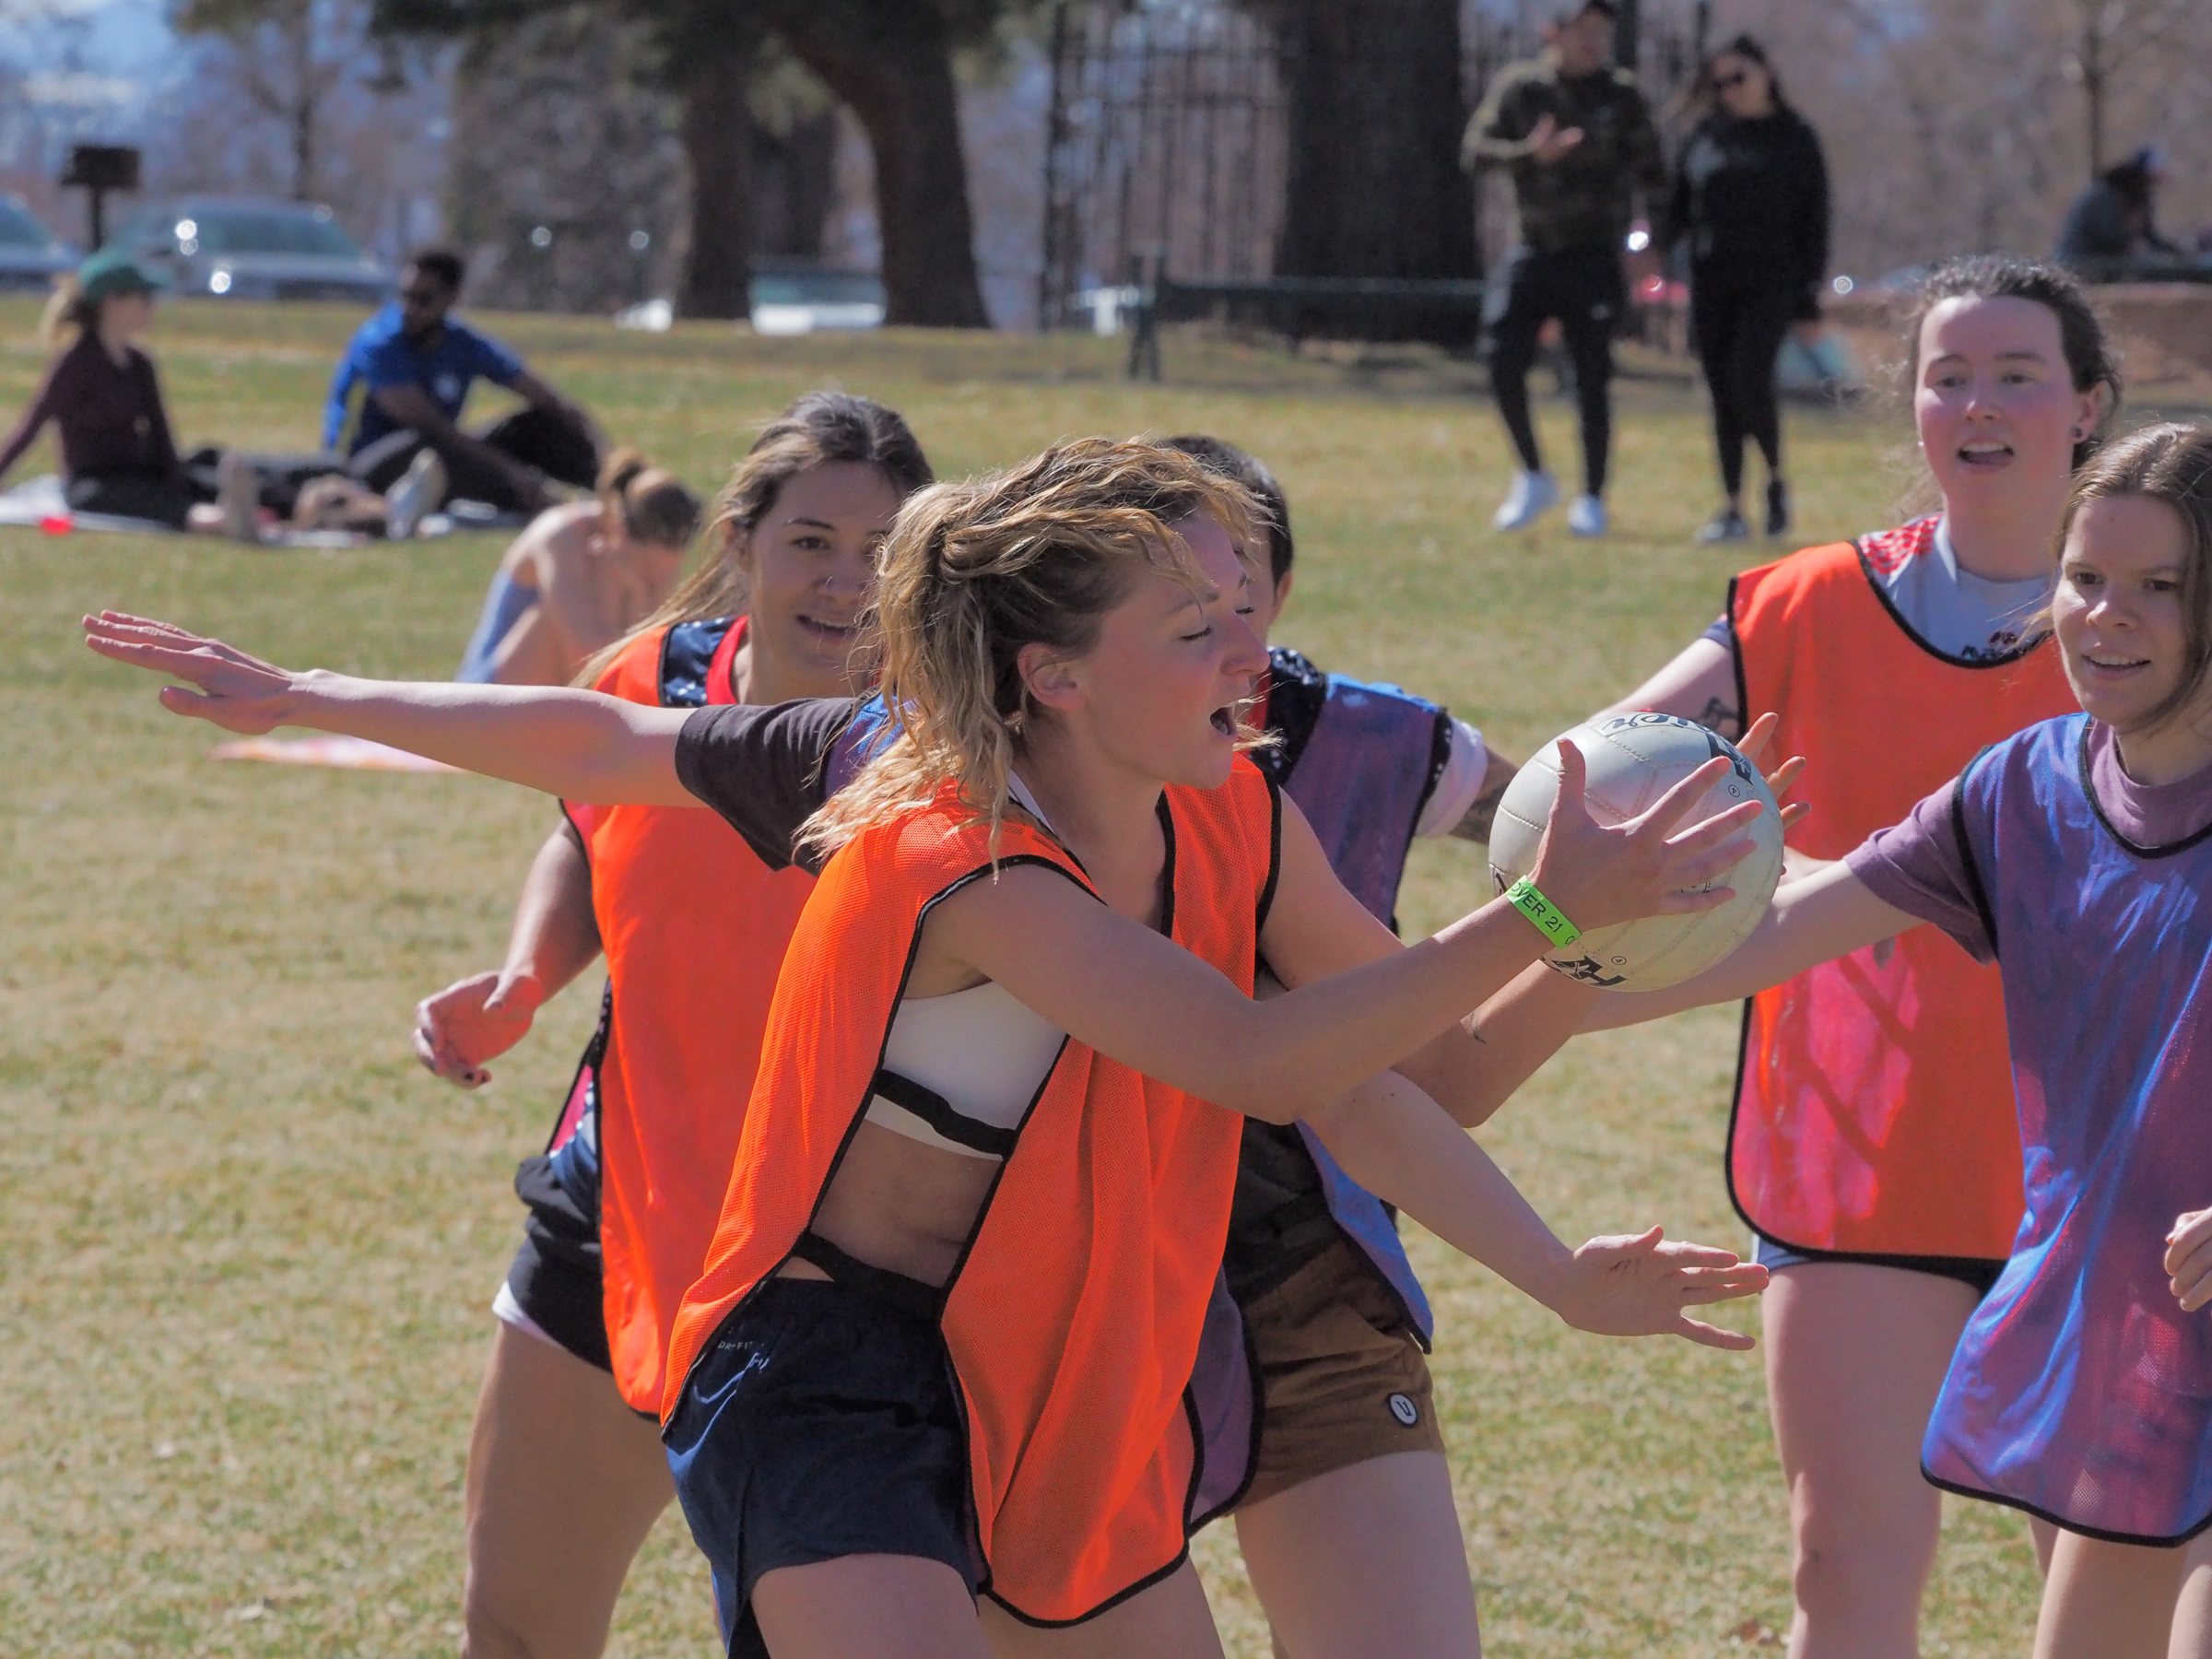 A woman wearing an orange hi-vis practice jersey catches a Gaelic football surrounded by other players.